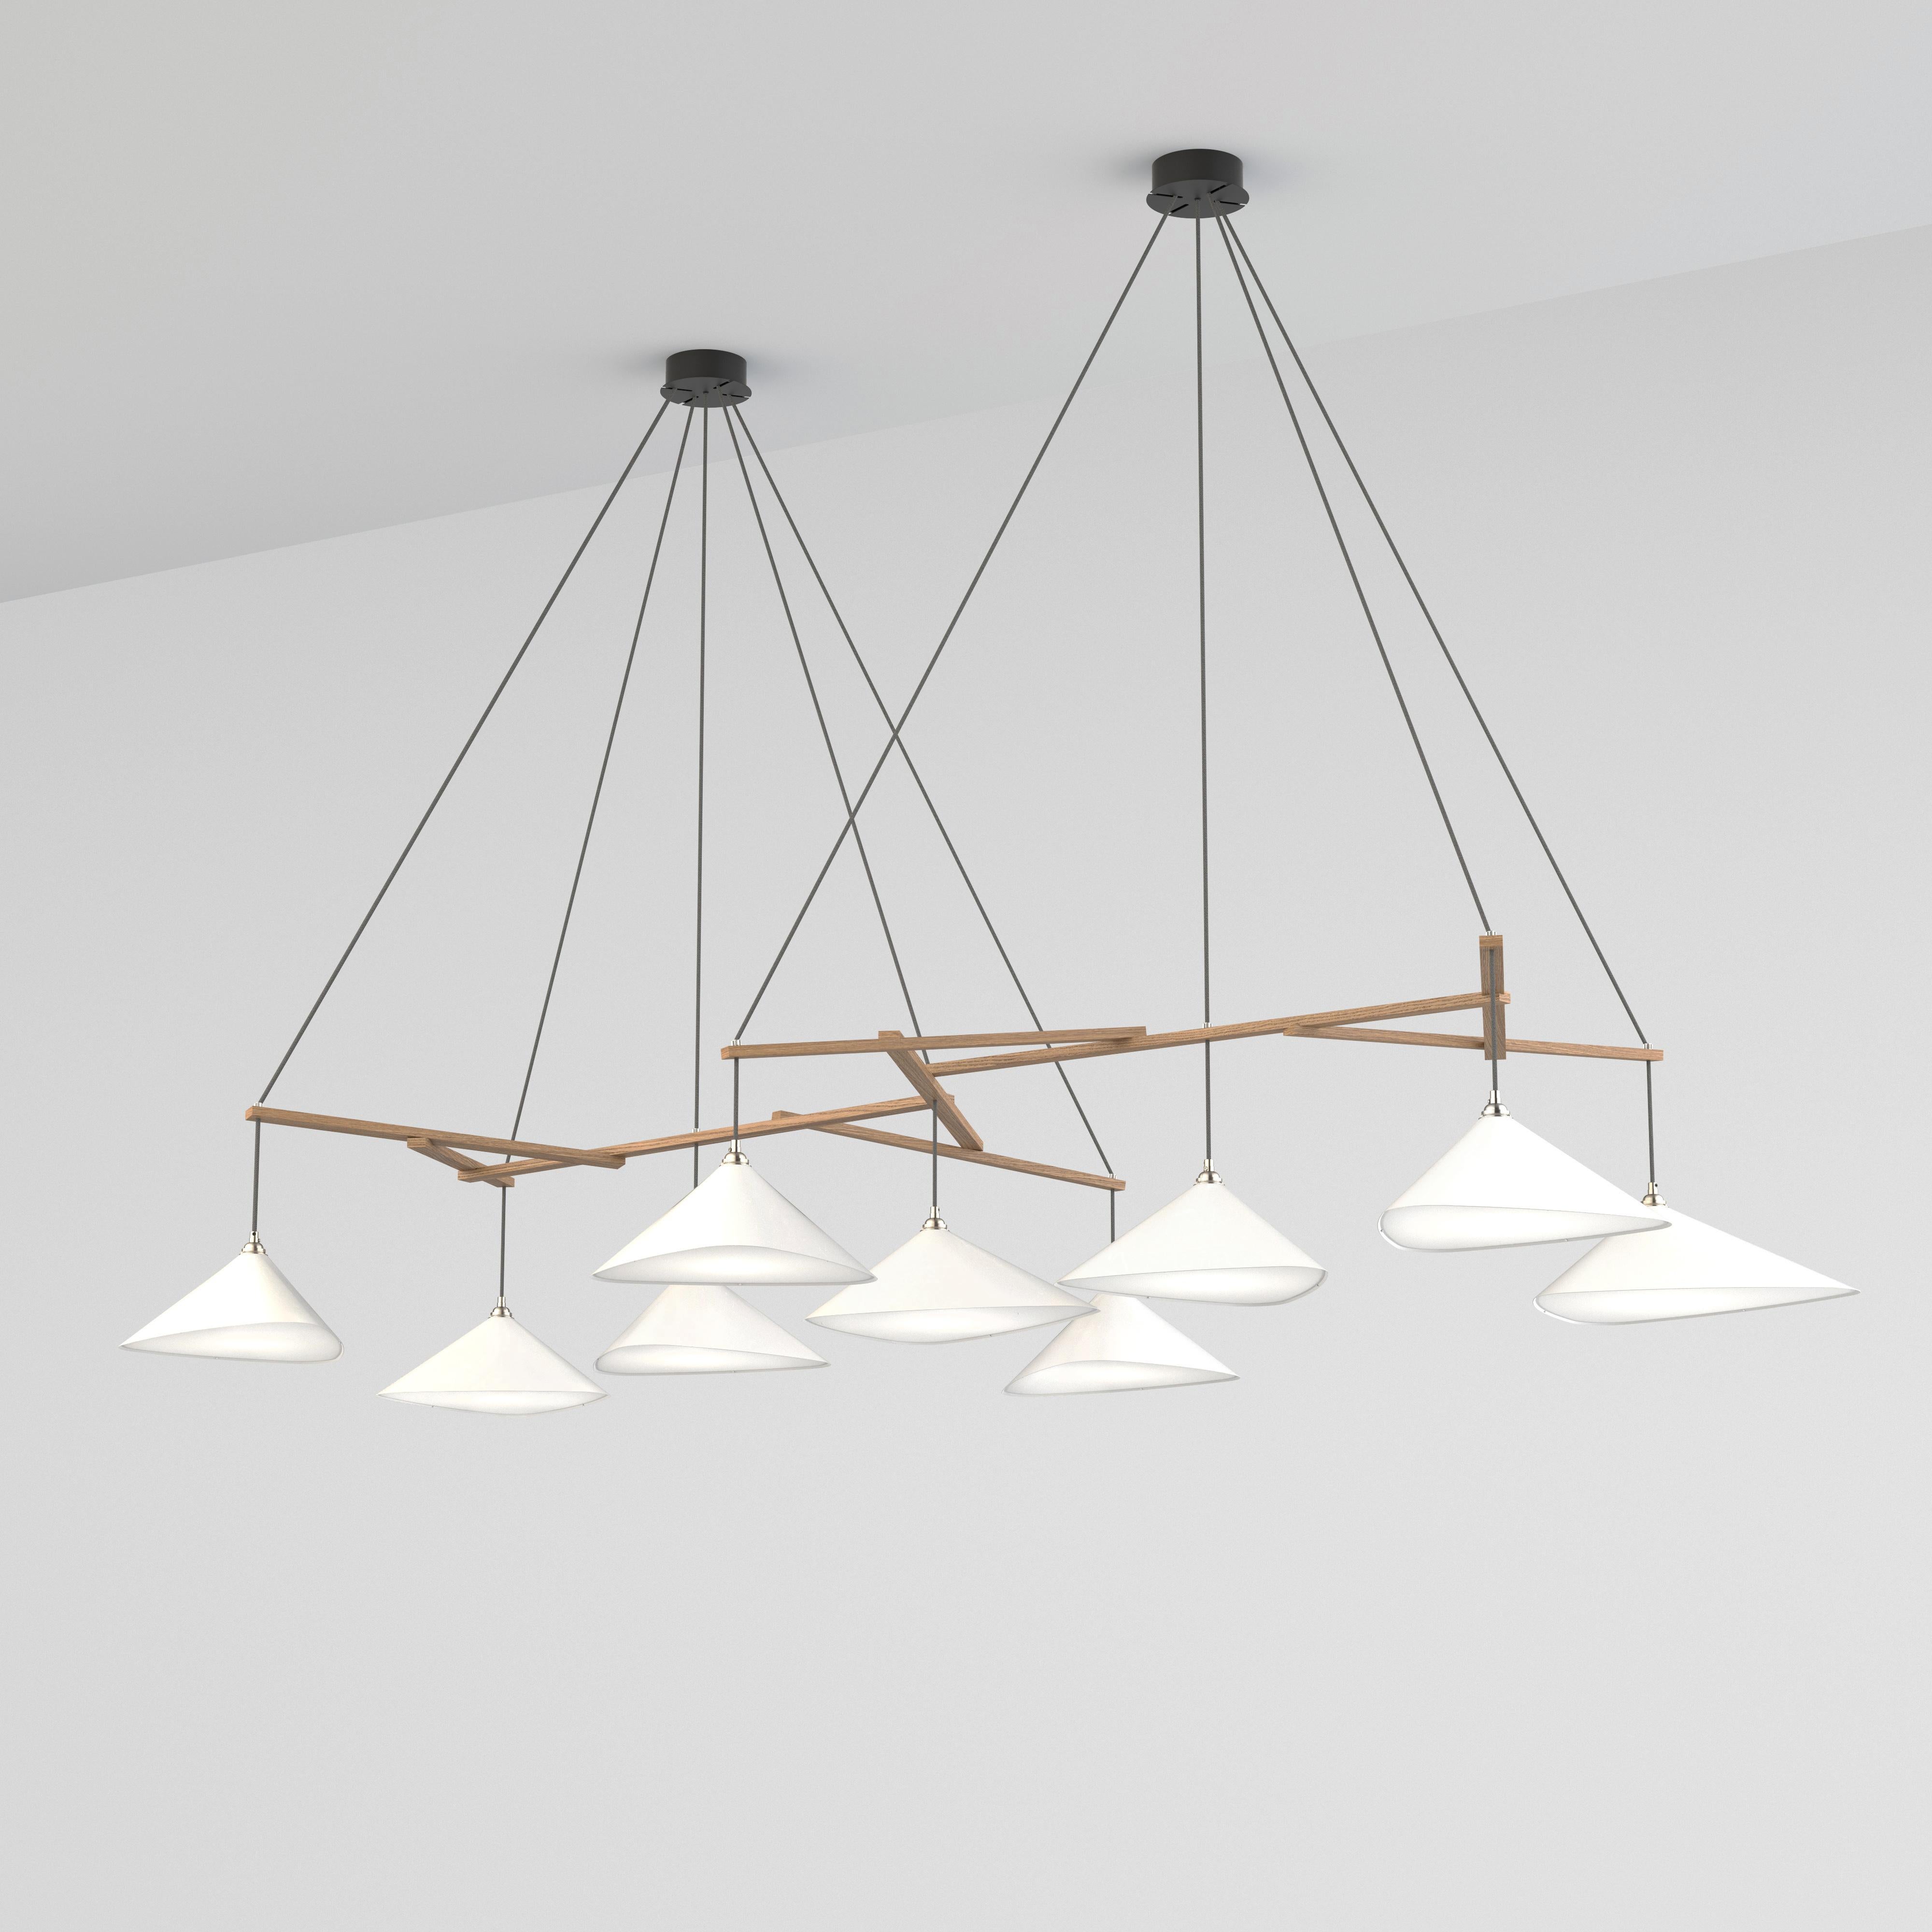 Monumental Daniel Becker Emily 9 Chandelier in Matte White/Oak for Moss Objects. Designed by Berlin luminary Daniel Becker and handmade to order using mid-century manufacturing techniques. Executed in high-quality sheet metal with matte white paint,